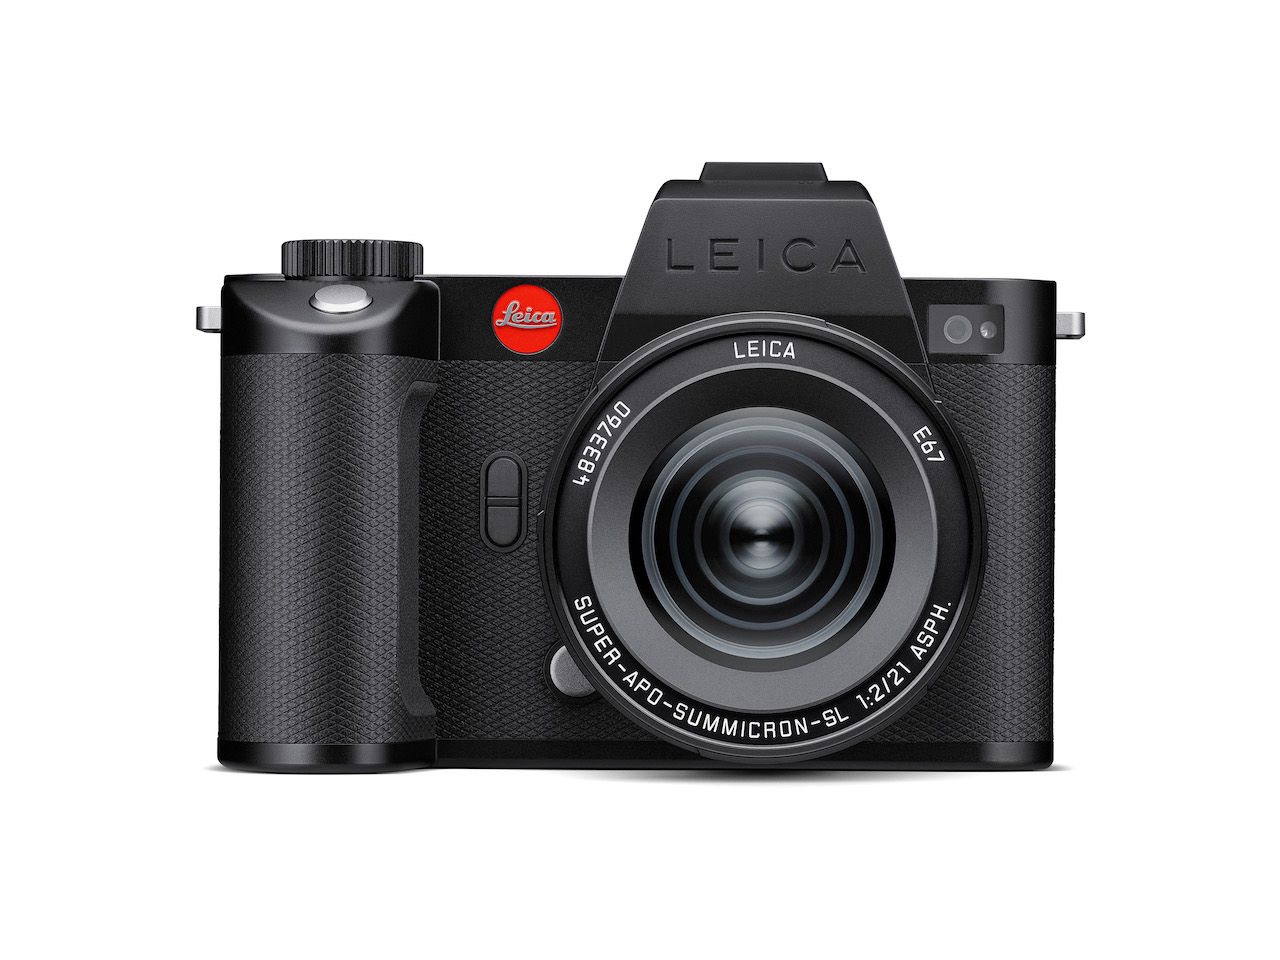 Leica expands its mirrorless SL-System with the Super-Vario-Elmarit-SL 14–24 f/2.8 ASPH and Super-APO-Summicron-SL 21 f/2 ASPH lenses.